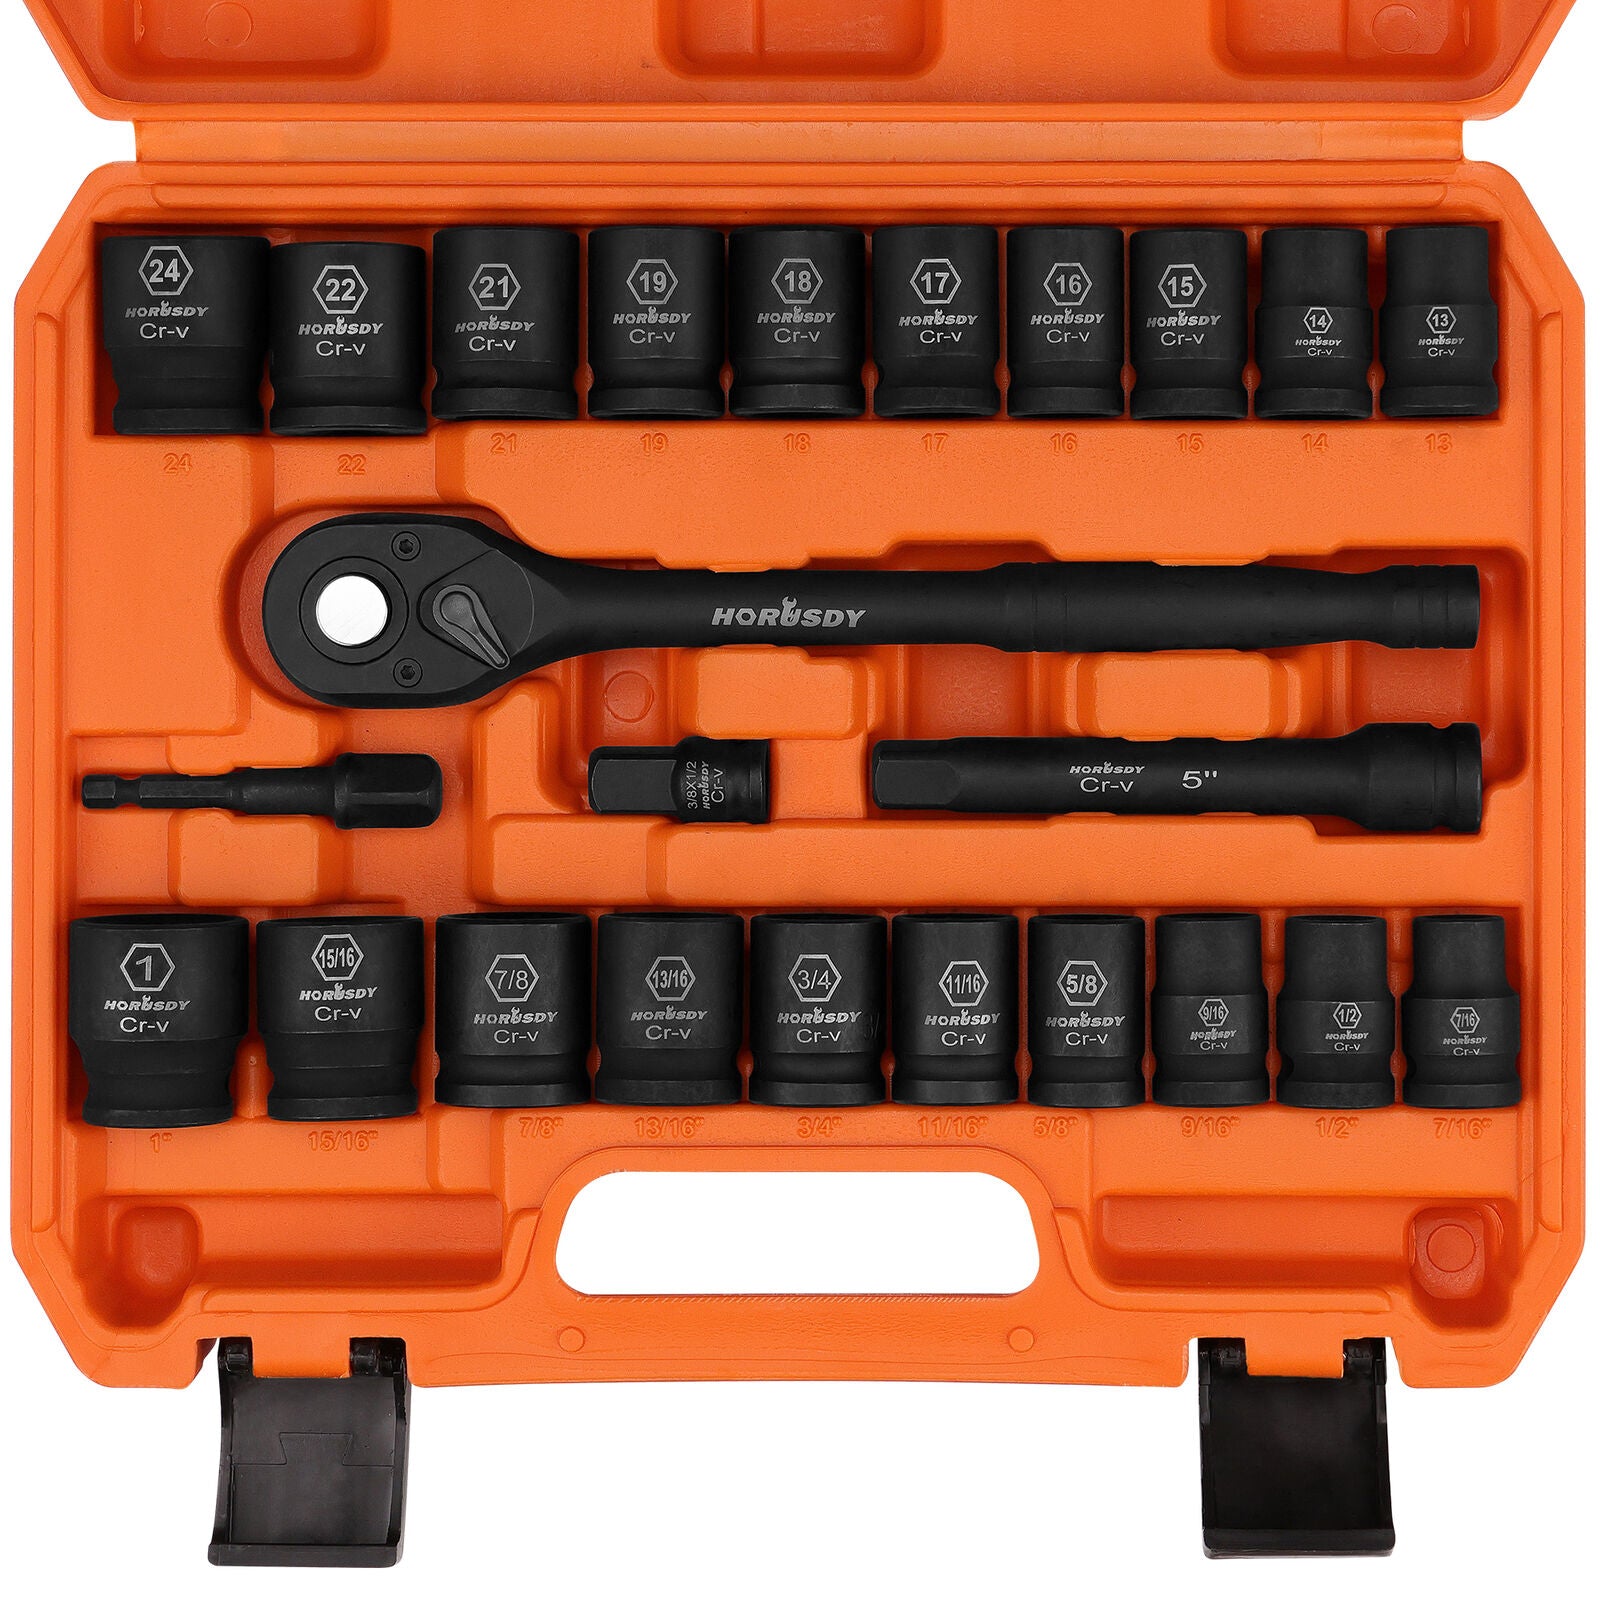 HORUSDY 24-Piece 1/2" Drive Impact Socket Set, Including SAE and Metric Sizes with Ratchet Handle and Extension Bar, Ideal for Diverse Applications